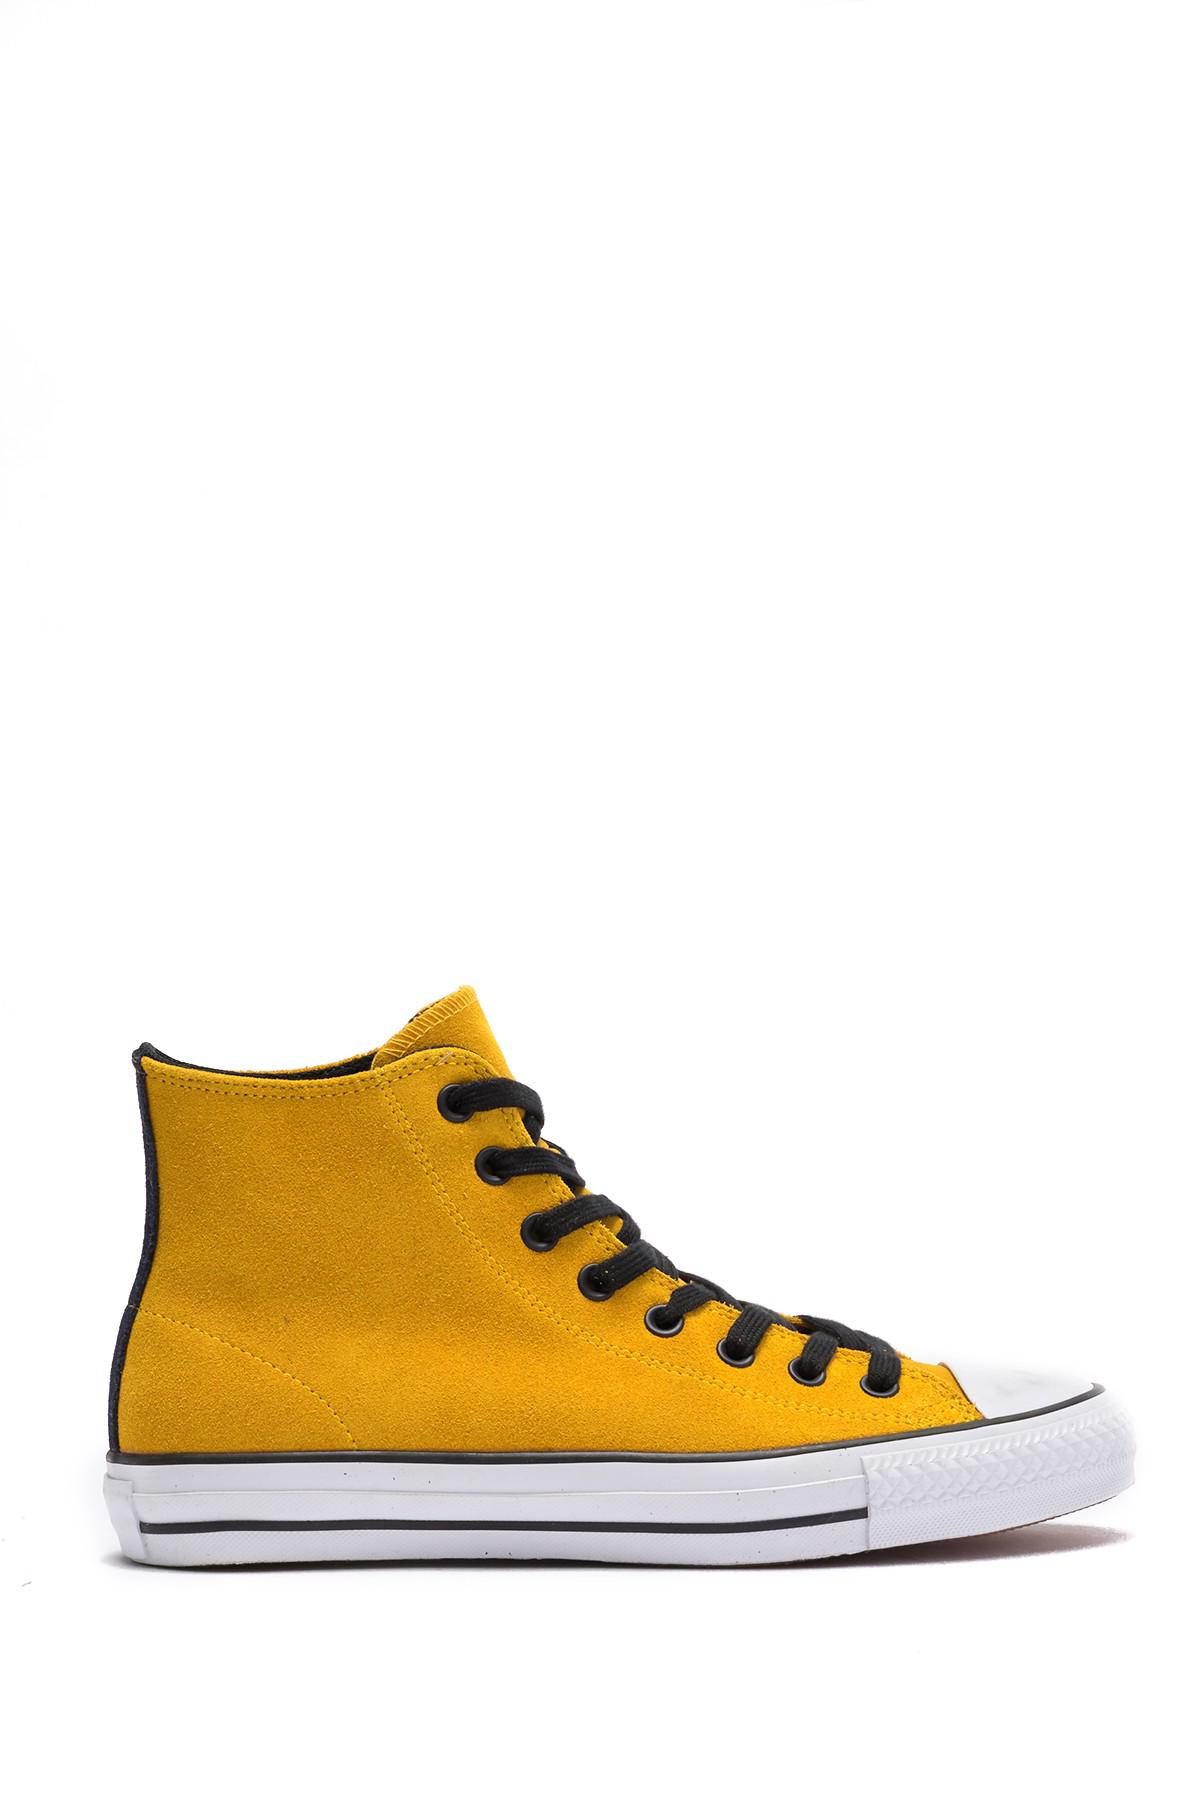 Converse Chuck Taylor Pro Suede High Top Sneaker in Yellow/Black/ob (Yellow)  for Men | Lyst